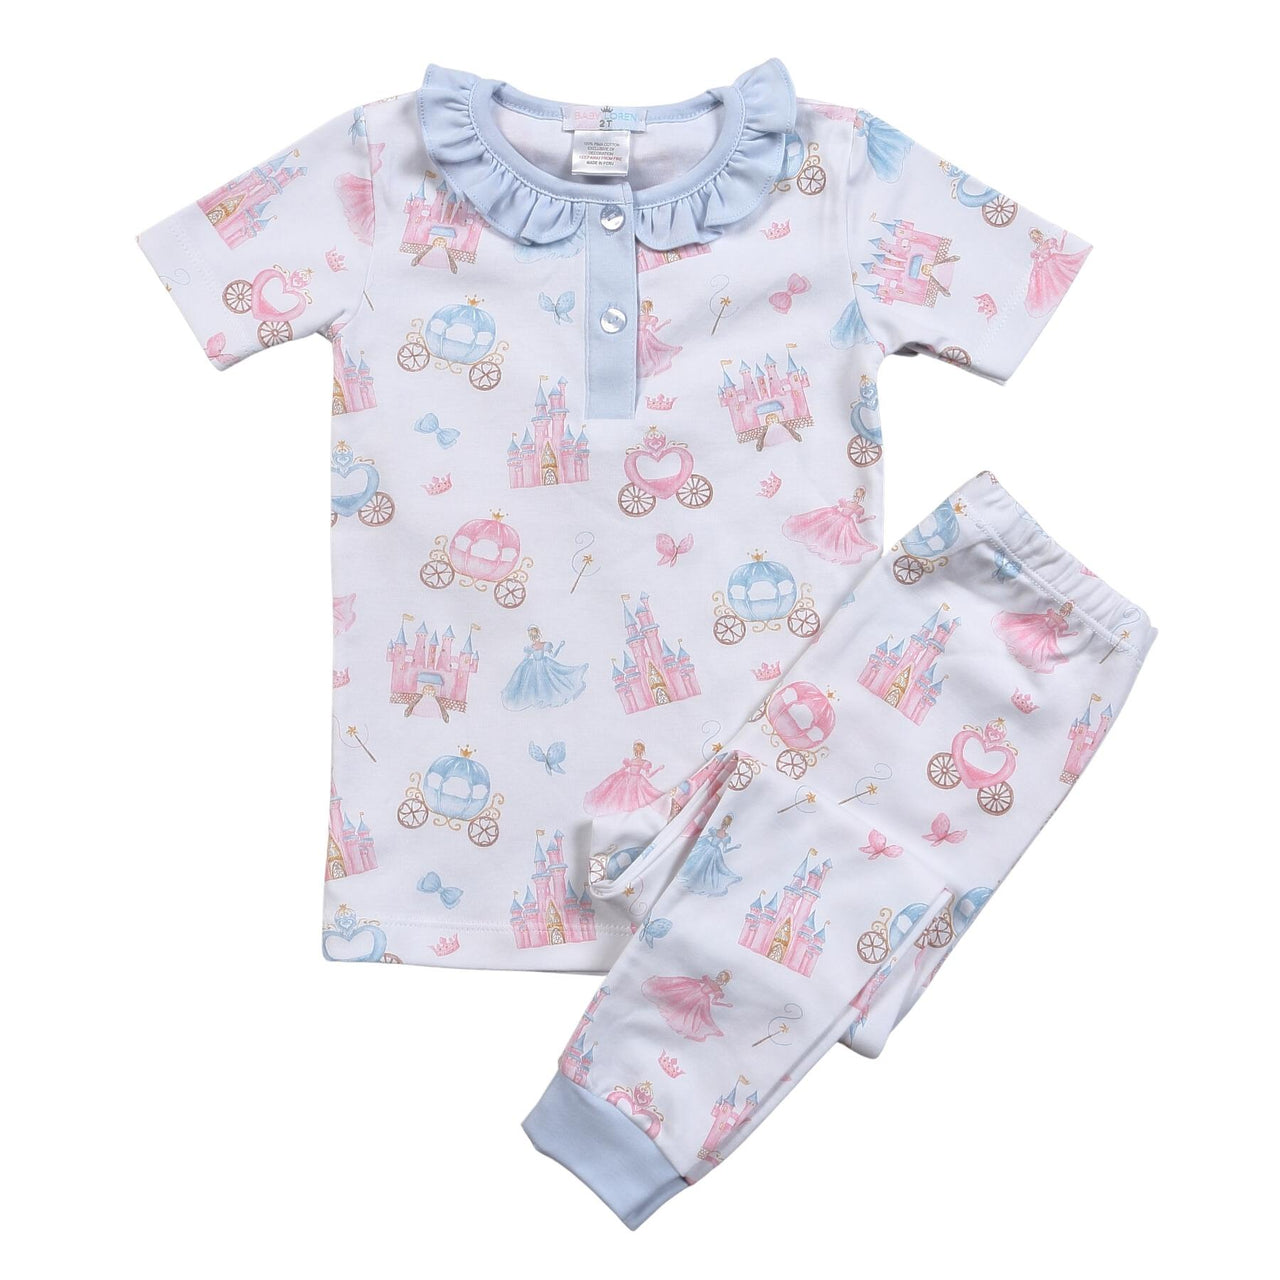 Baby Loren Princess and Castles Pima Two Pieces Loungewear PRC-099 5101